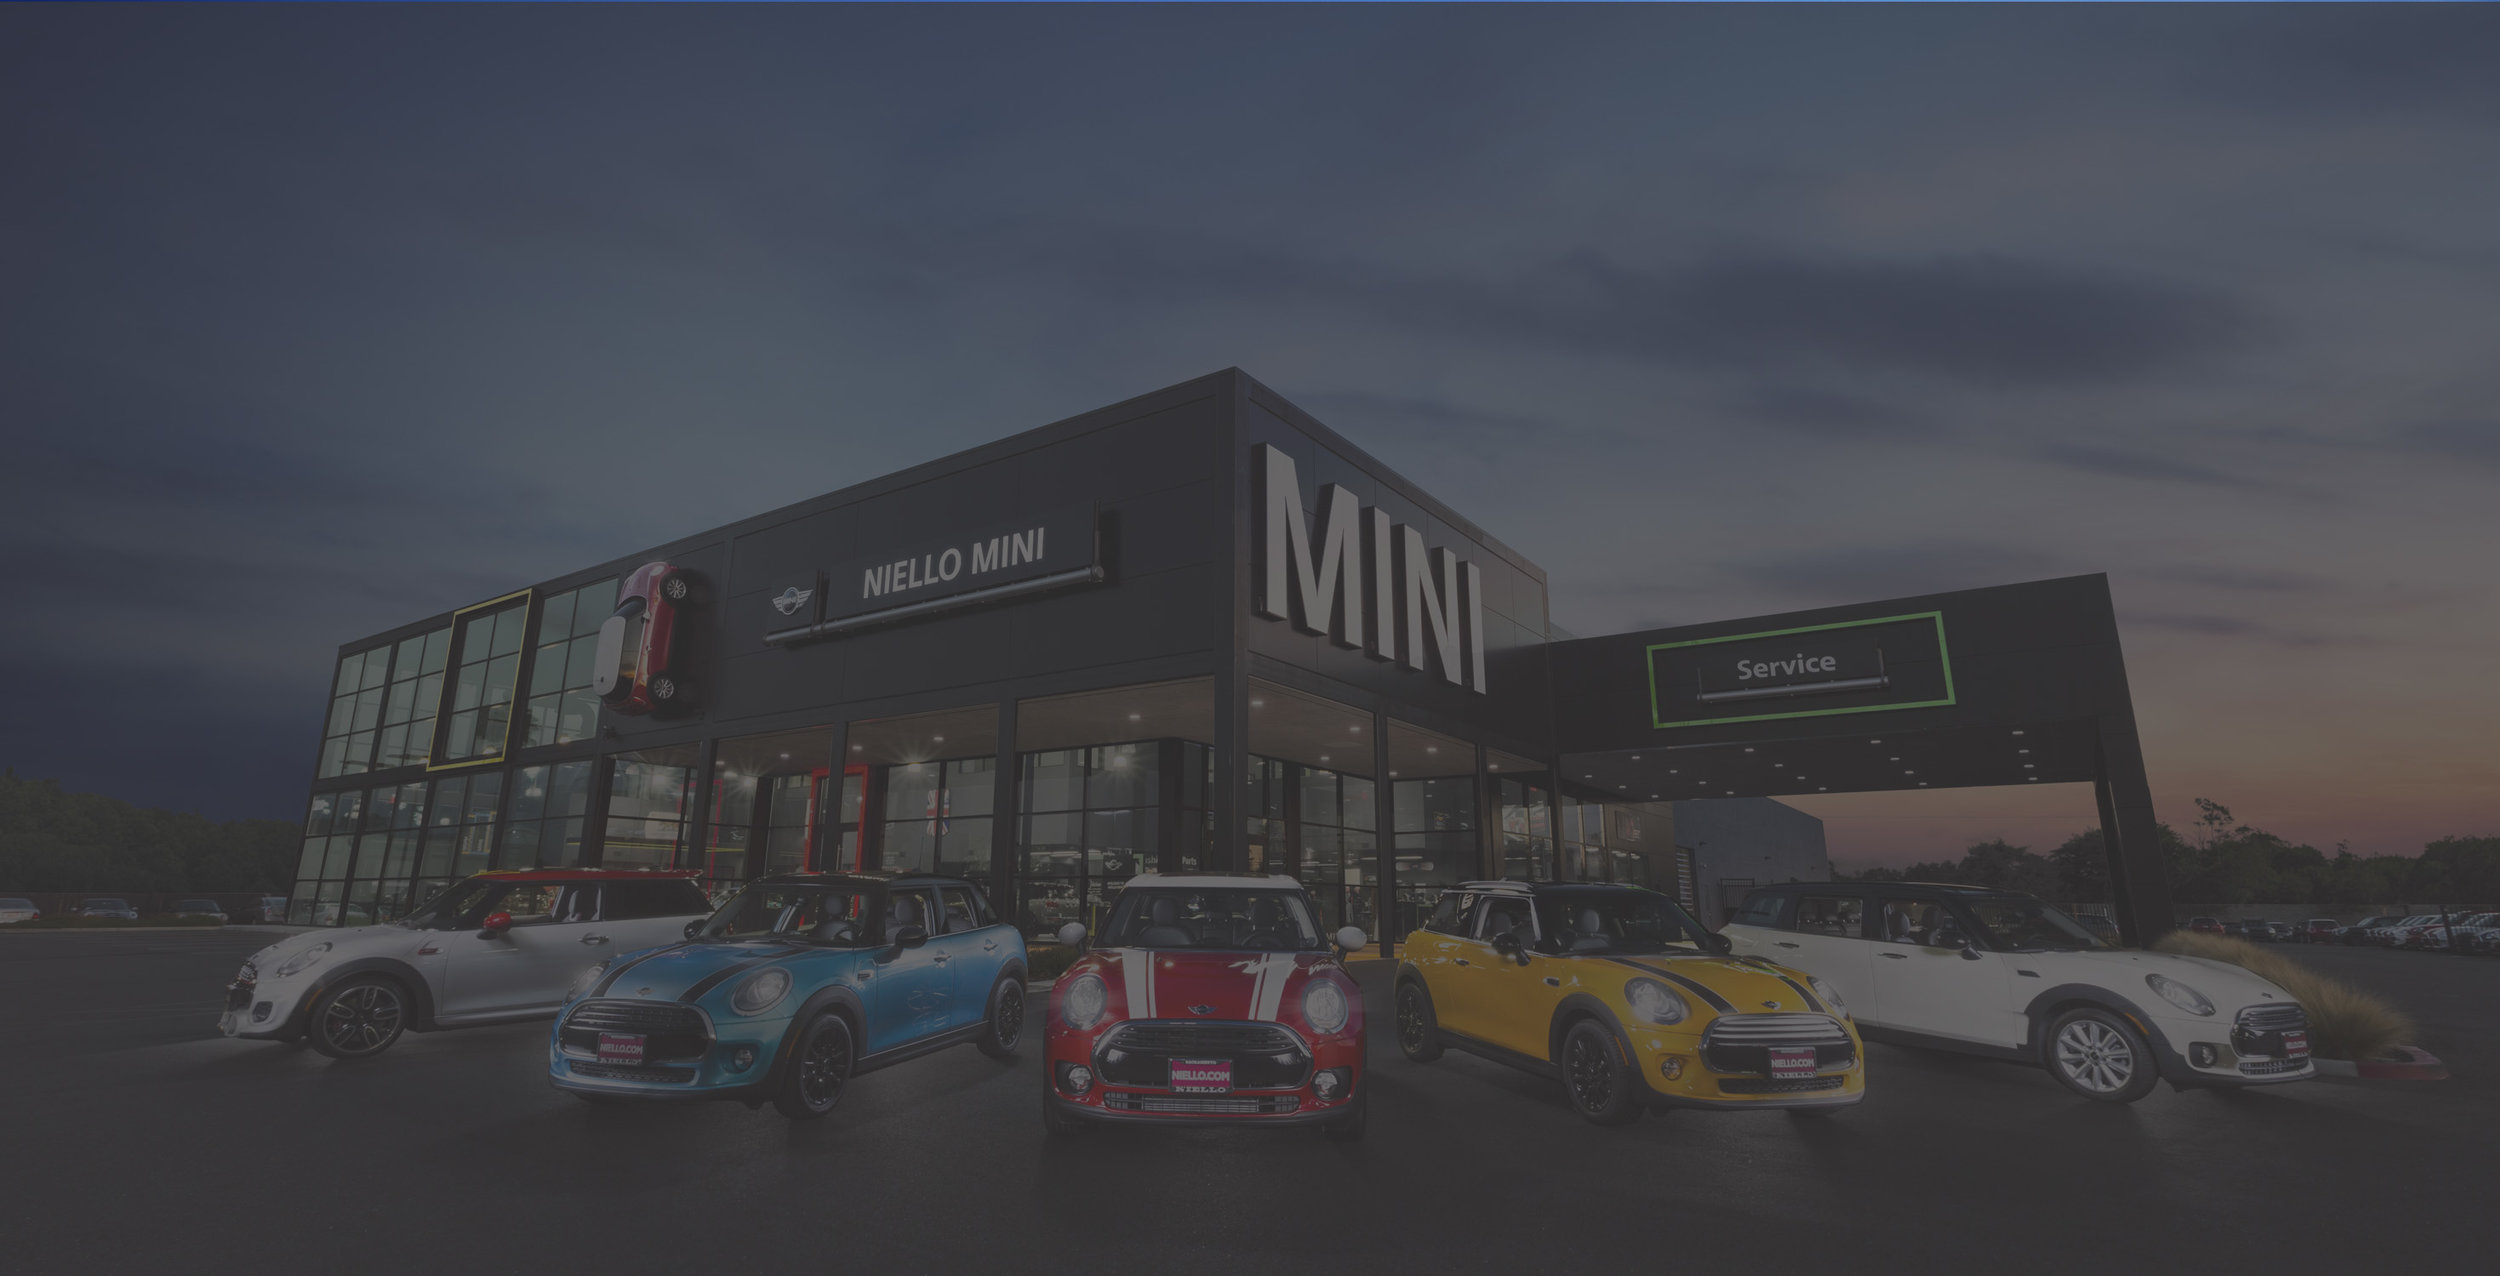  Since its creation in 1959, the MINI brand has always stood for ideas, inspiration and passion. A new MINI facility in Sacramento , California reflects the combination of clear, emotionally-appealing design with a focus on the essential. With a tota